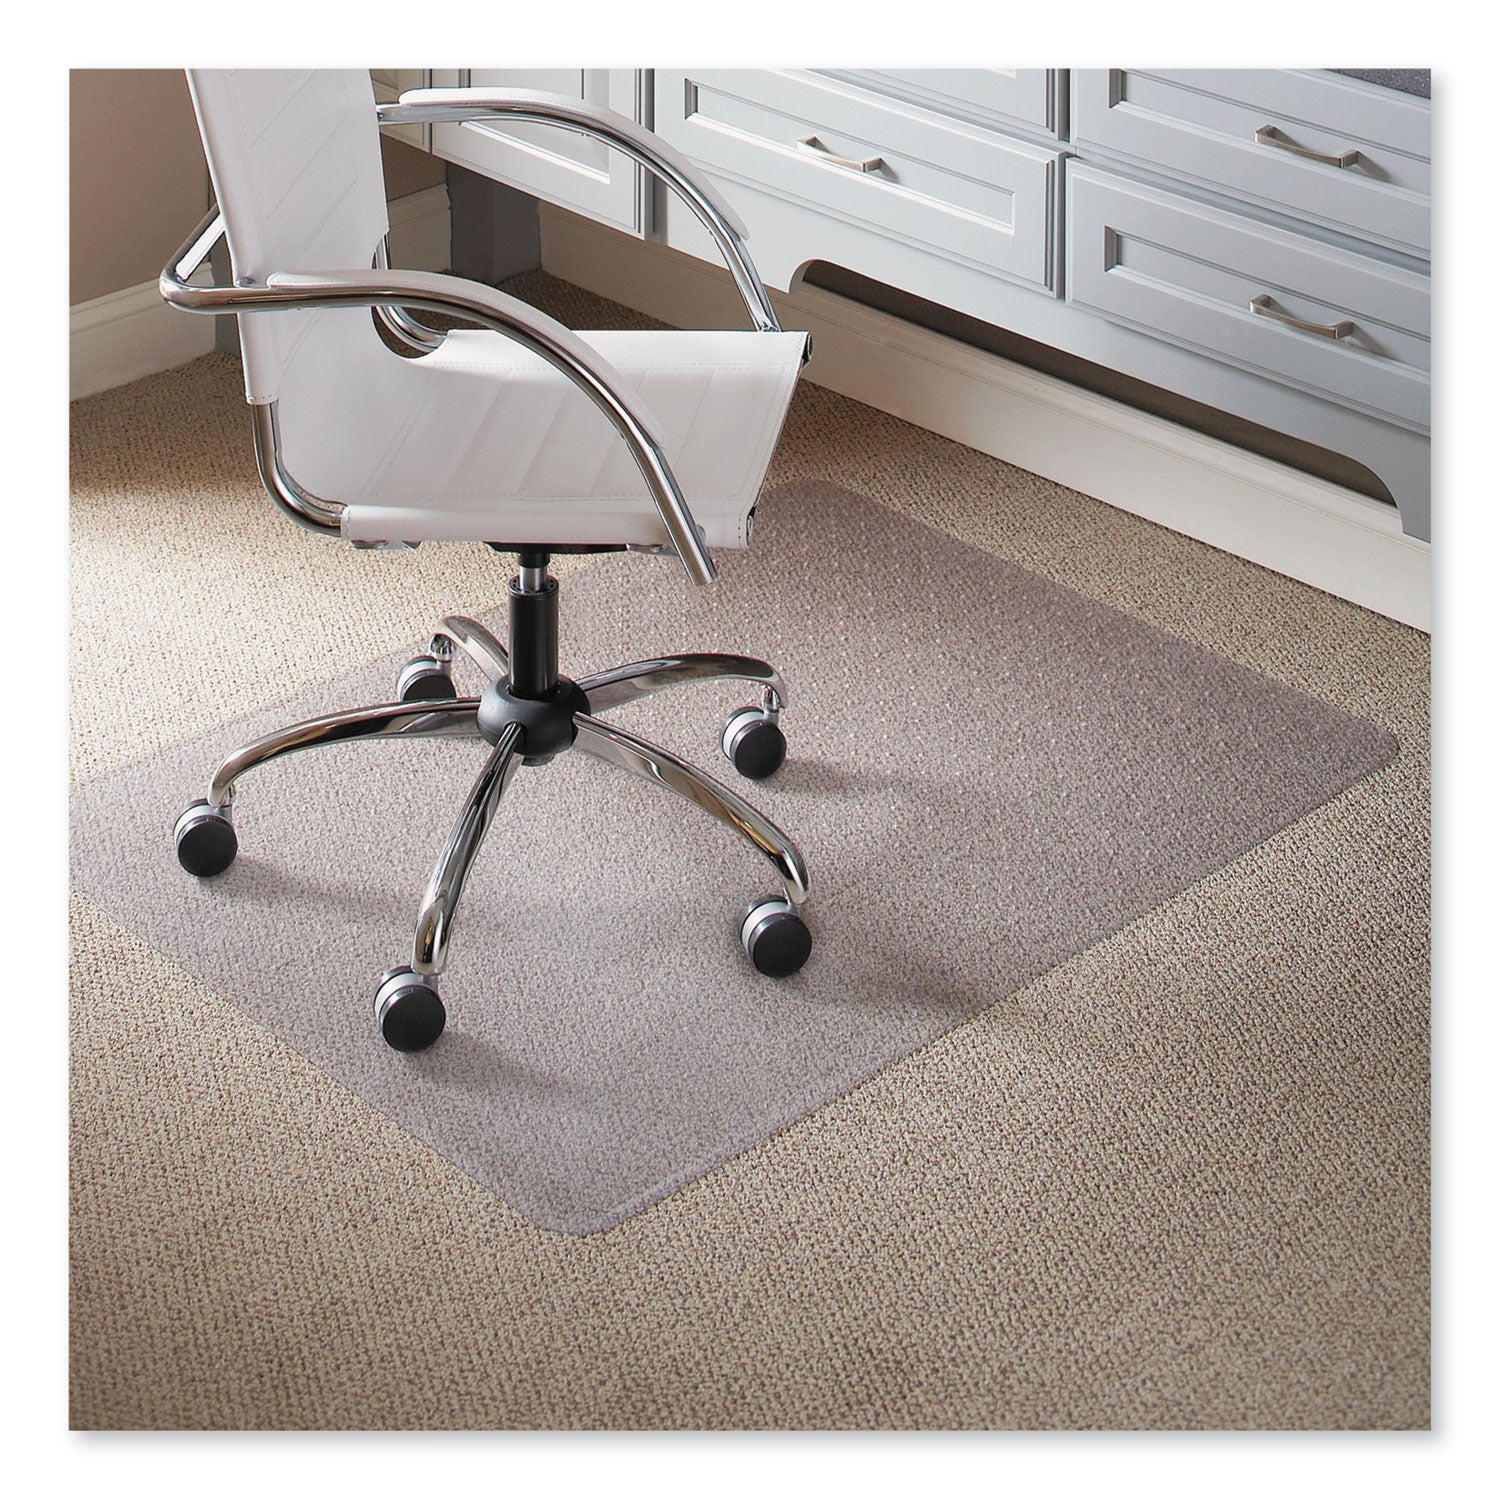 EverLife Light Use Chair Mat for Flat to Low Pile Carpet, Rectangular, 46 x 60, Clear - 